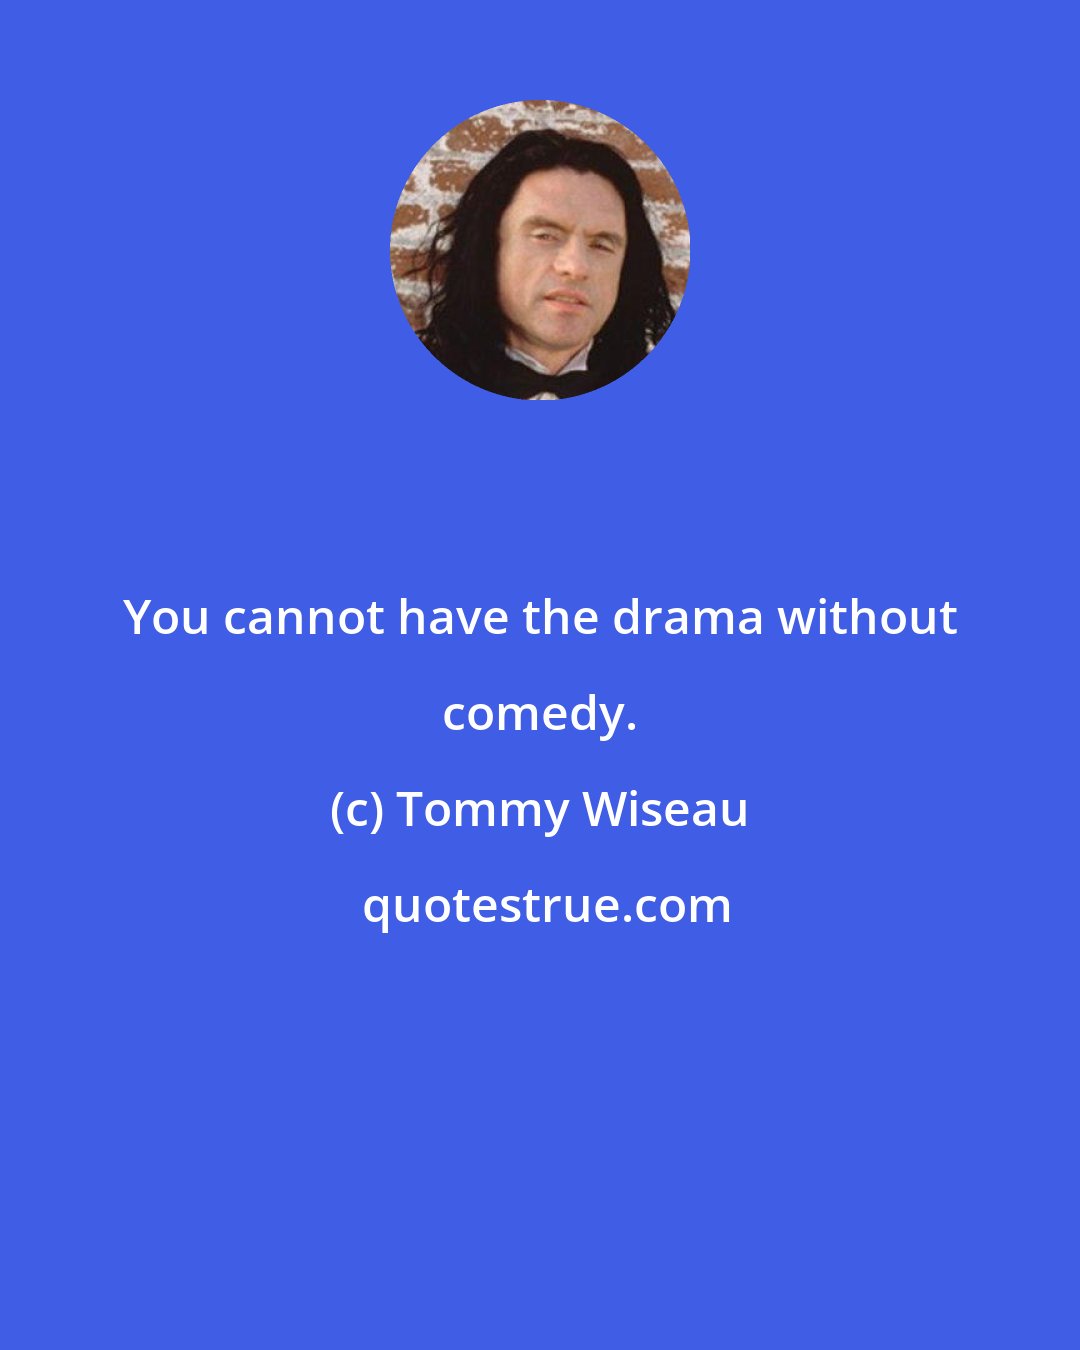 Tommy Wiseau: You cannot have the drama without comedy.